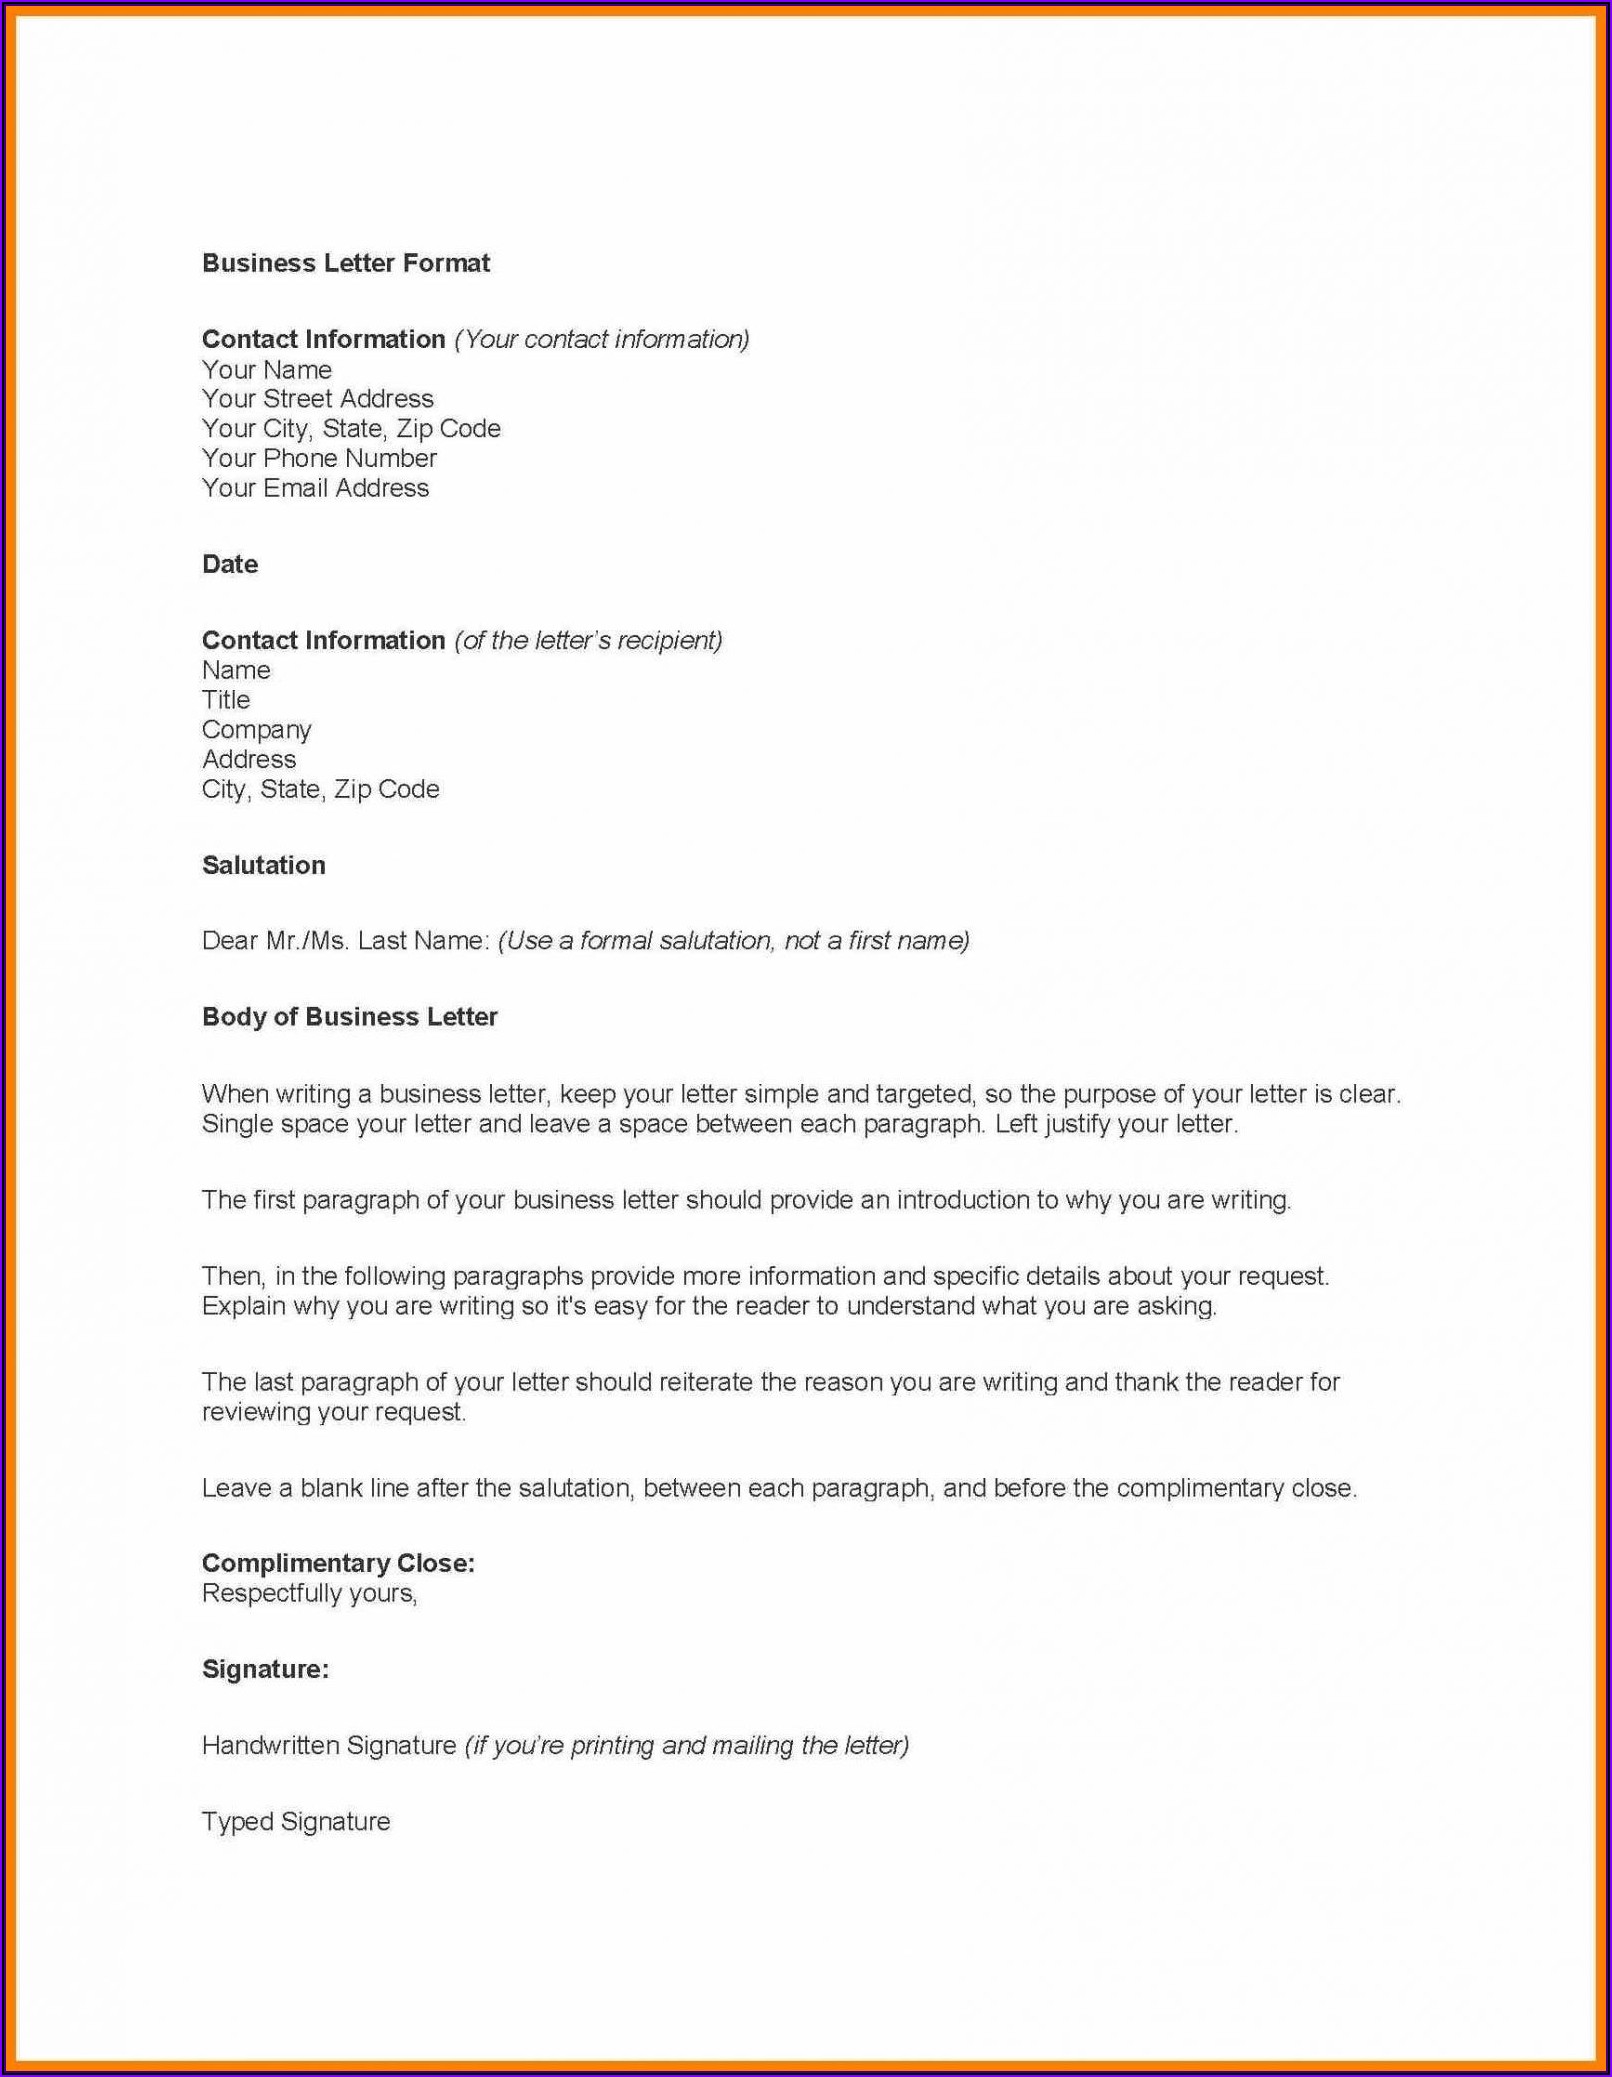 Microsoft Office Word 2007 Business Letter Template